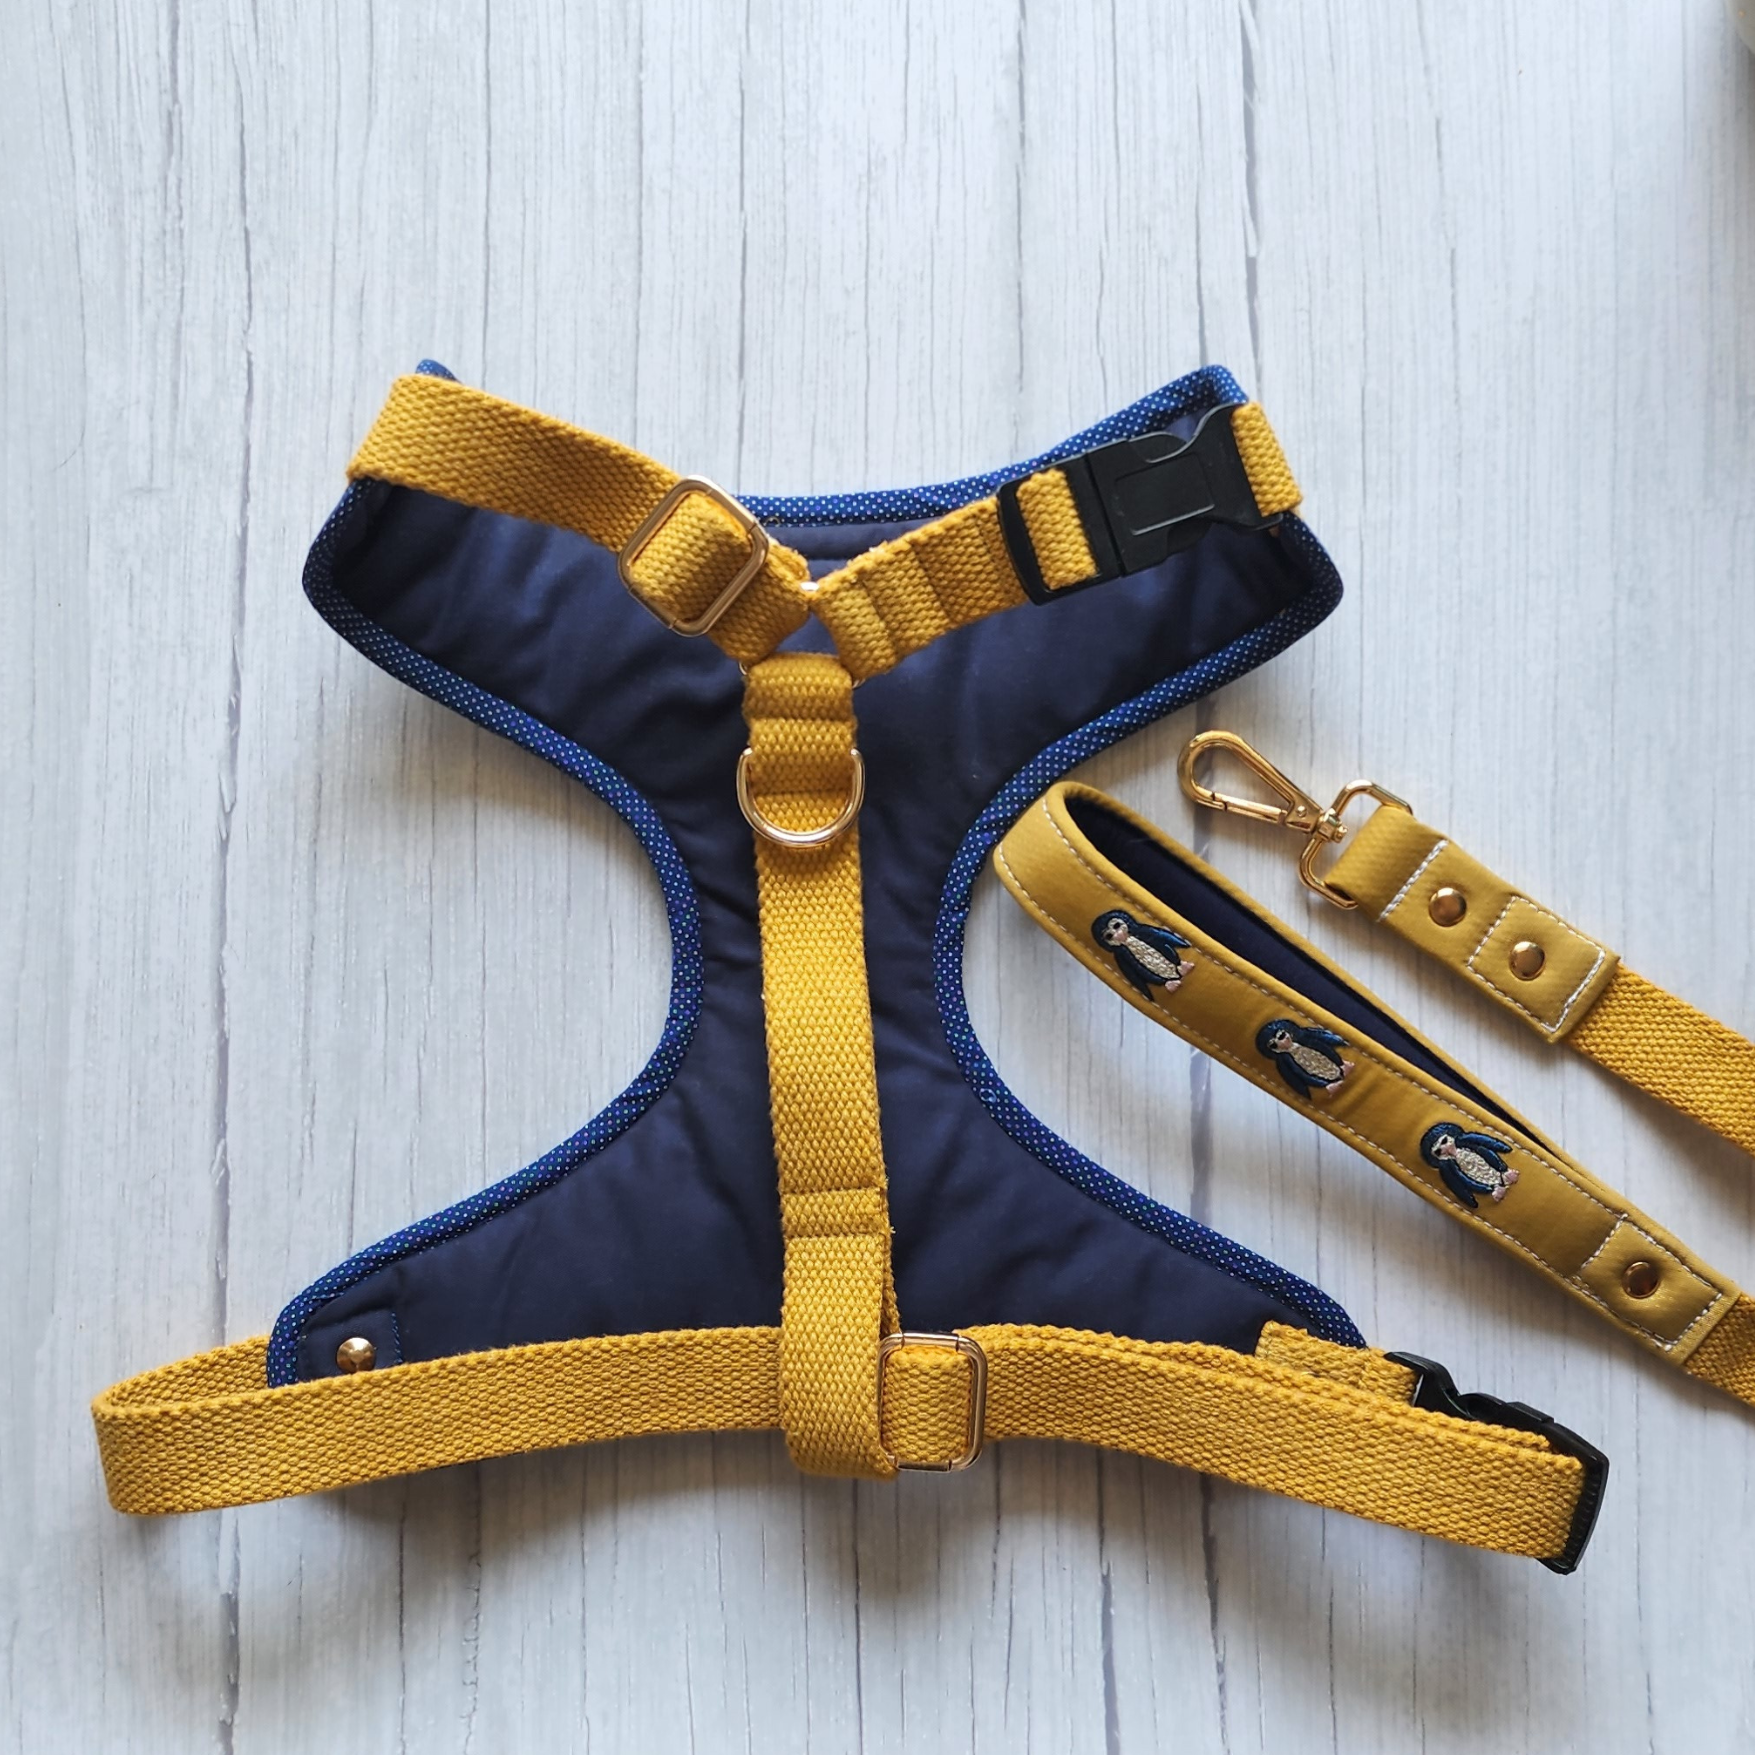 Cotton Dog Harness | Durable dog harness India